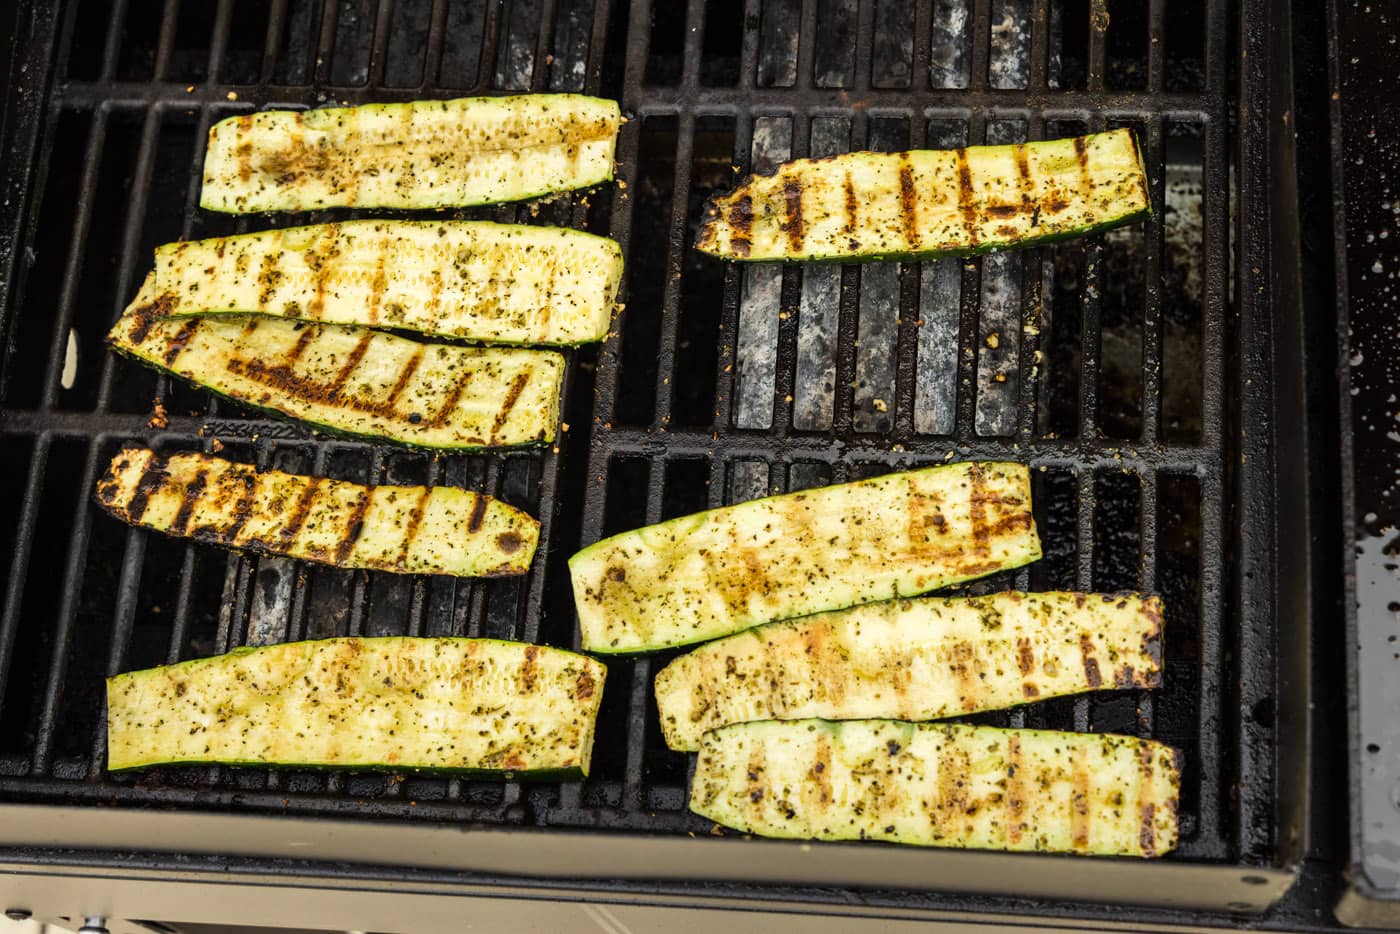 zucchini with char marks on the grill